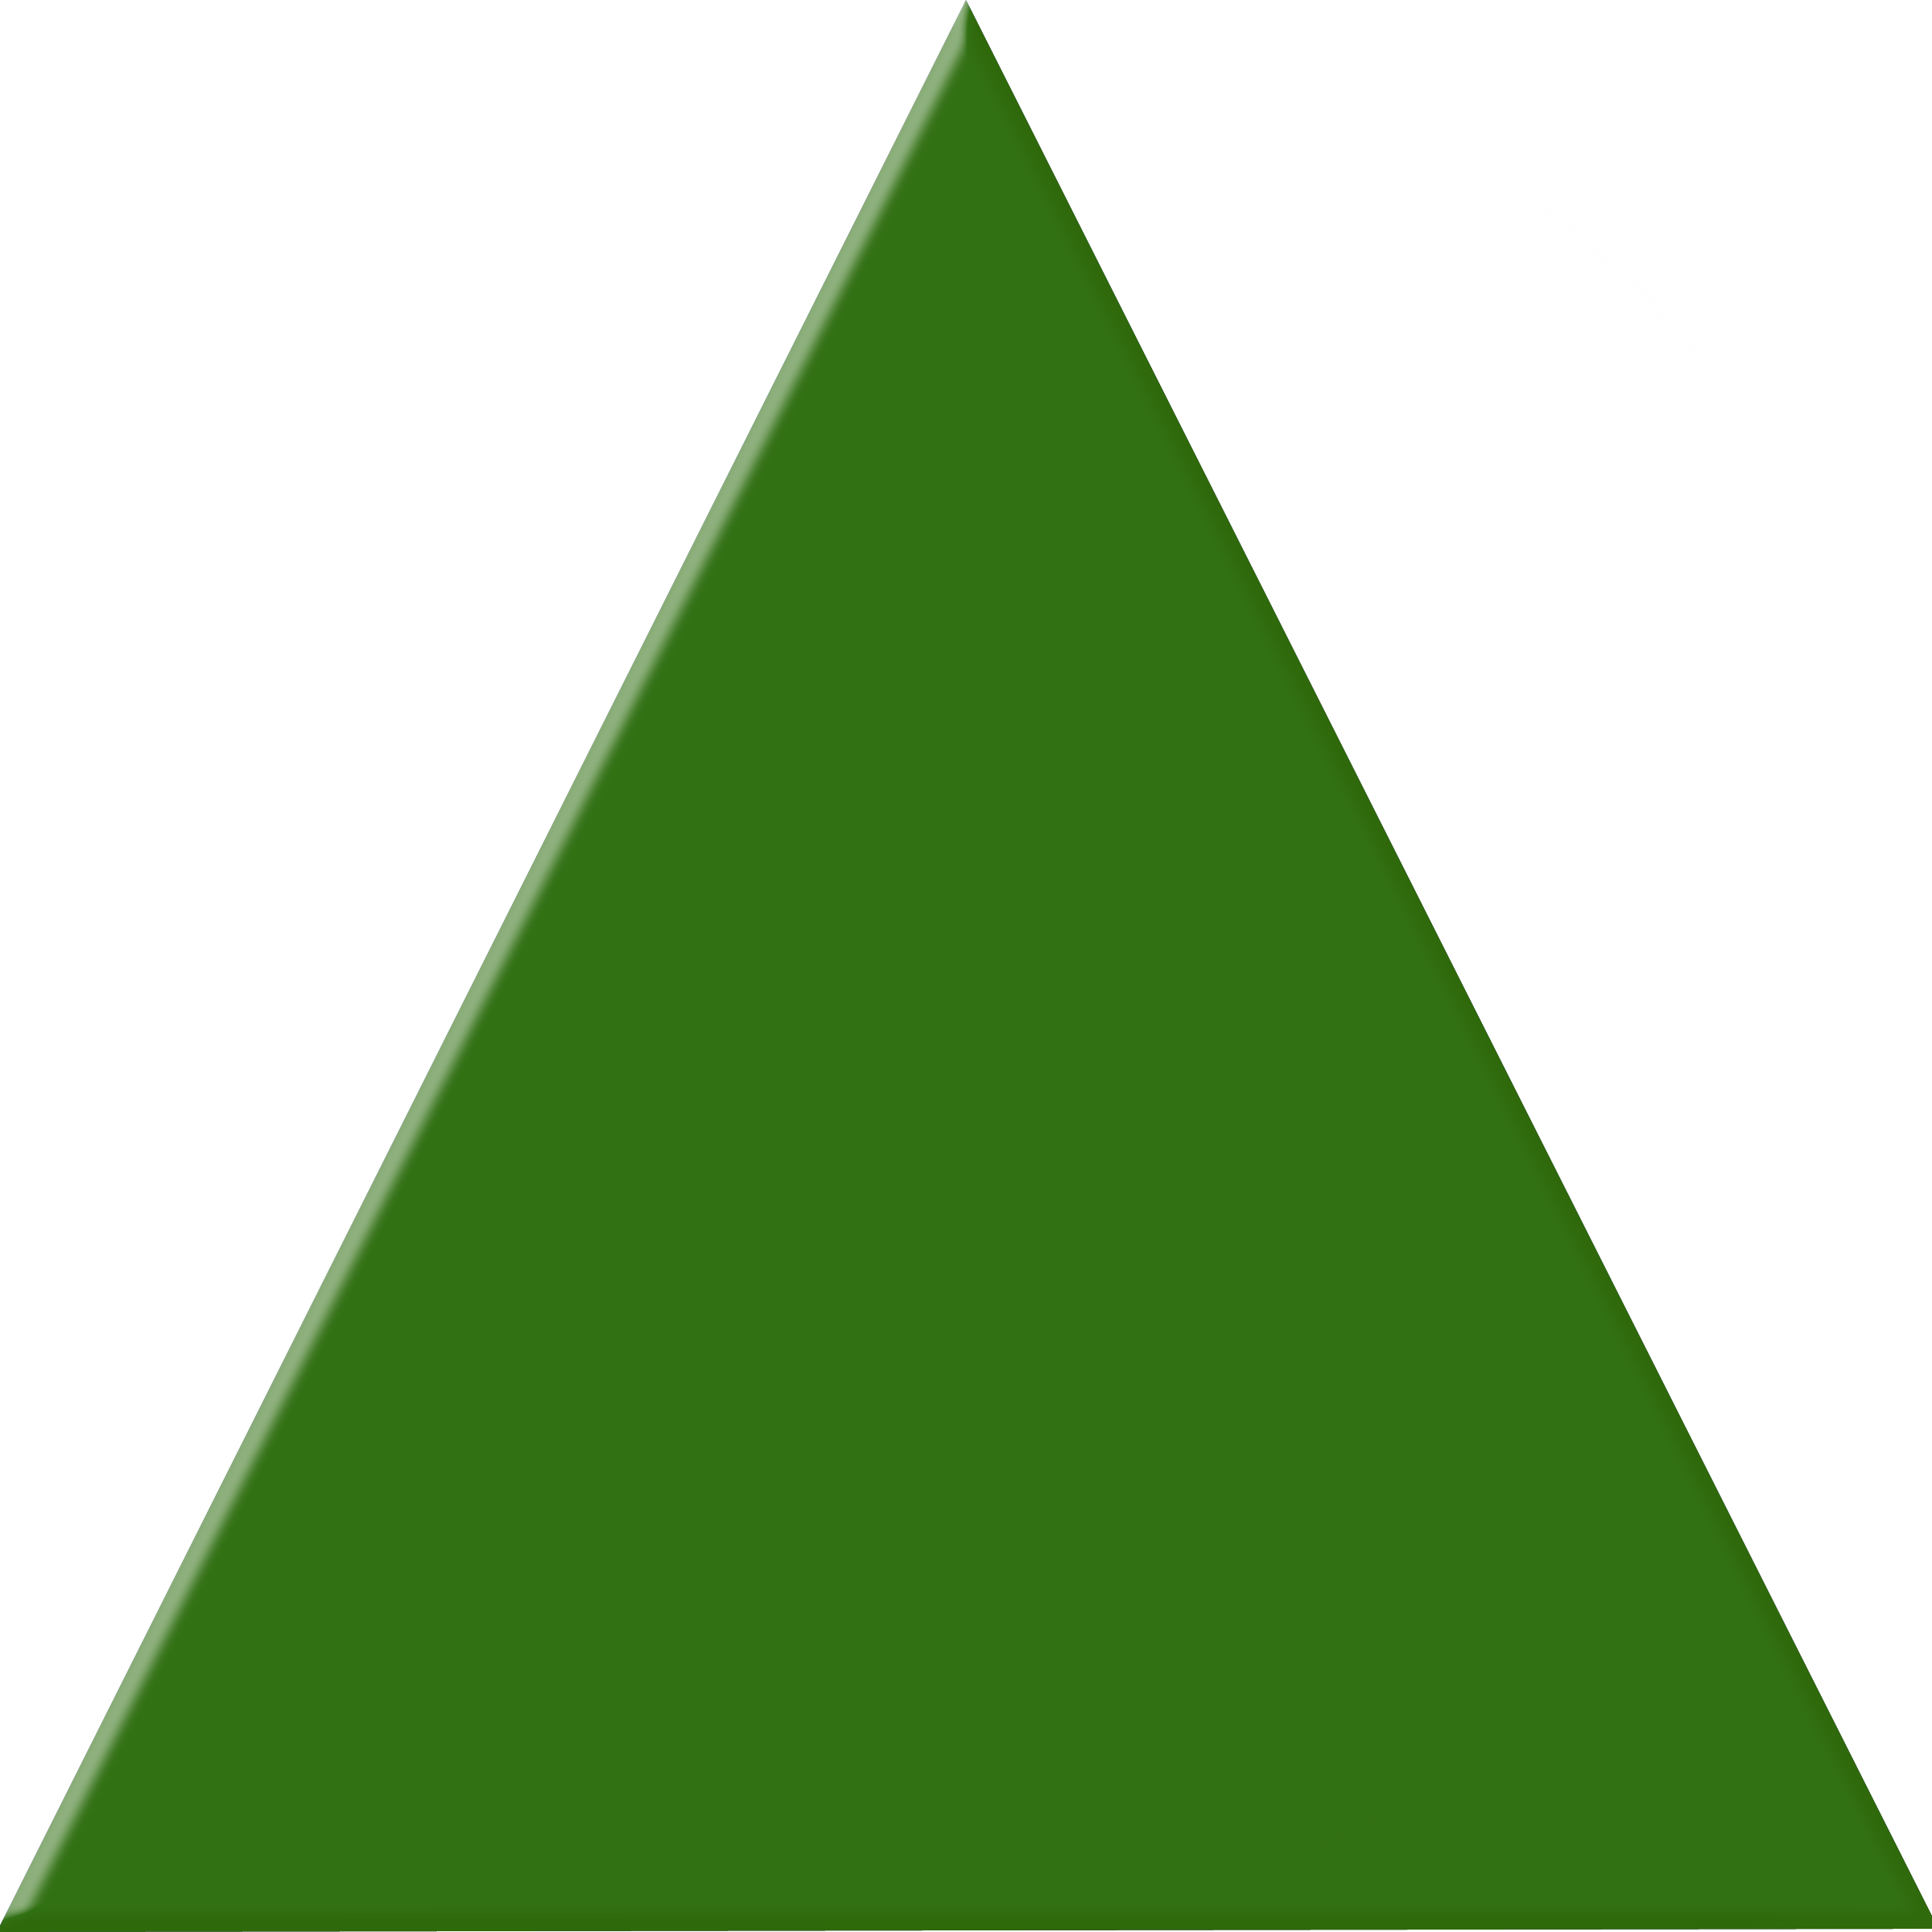 green-triangle-94917.png